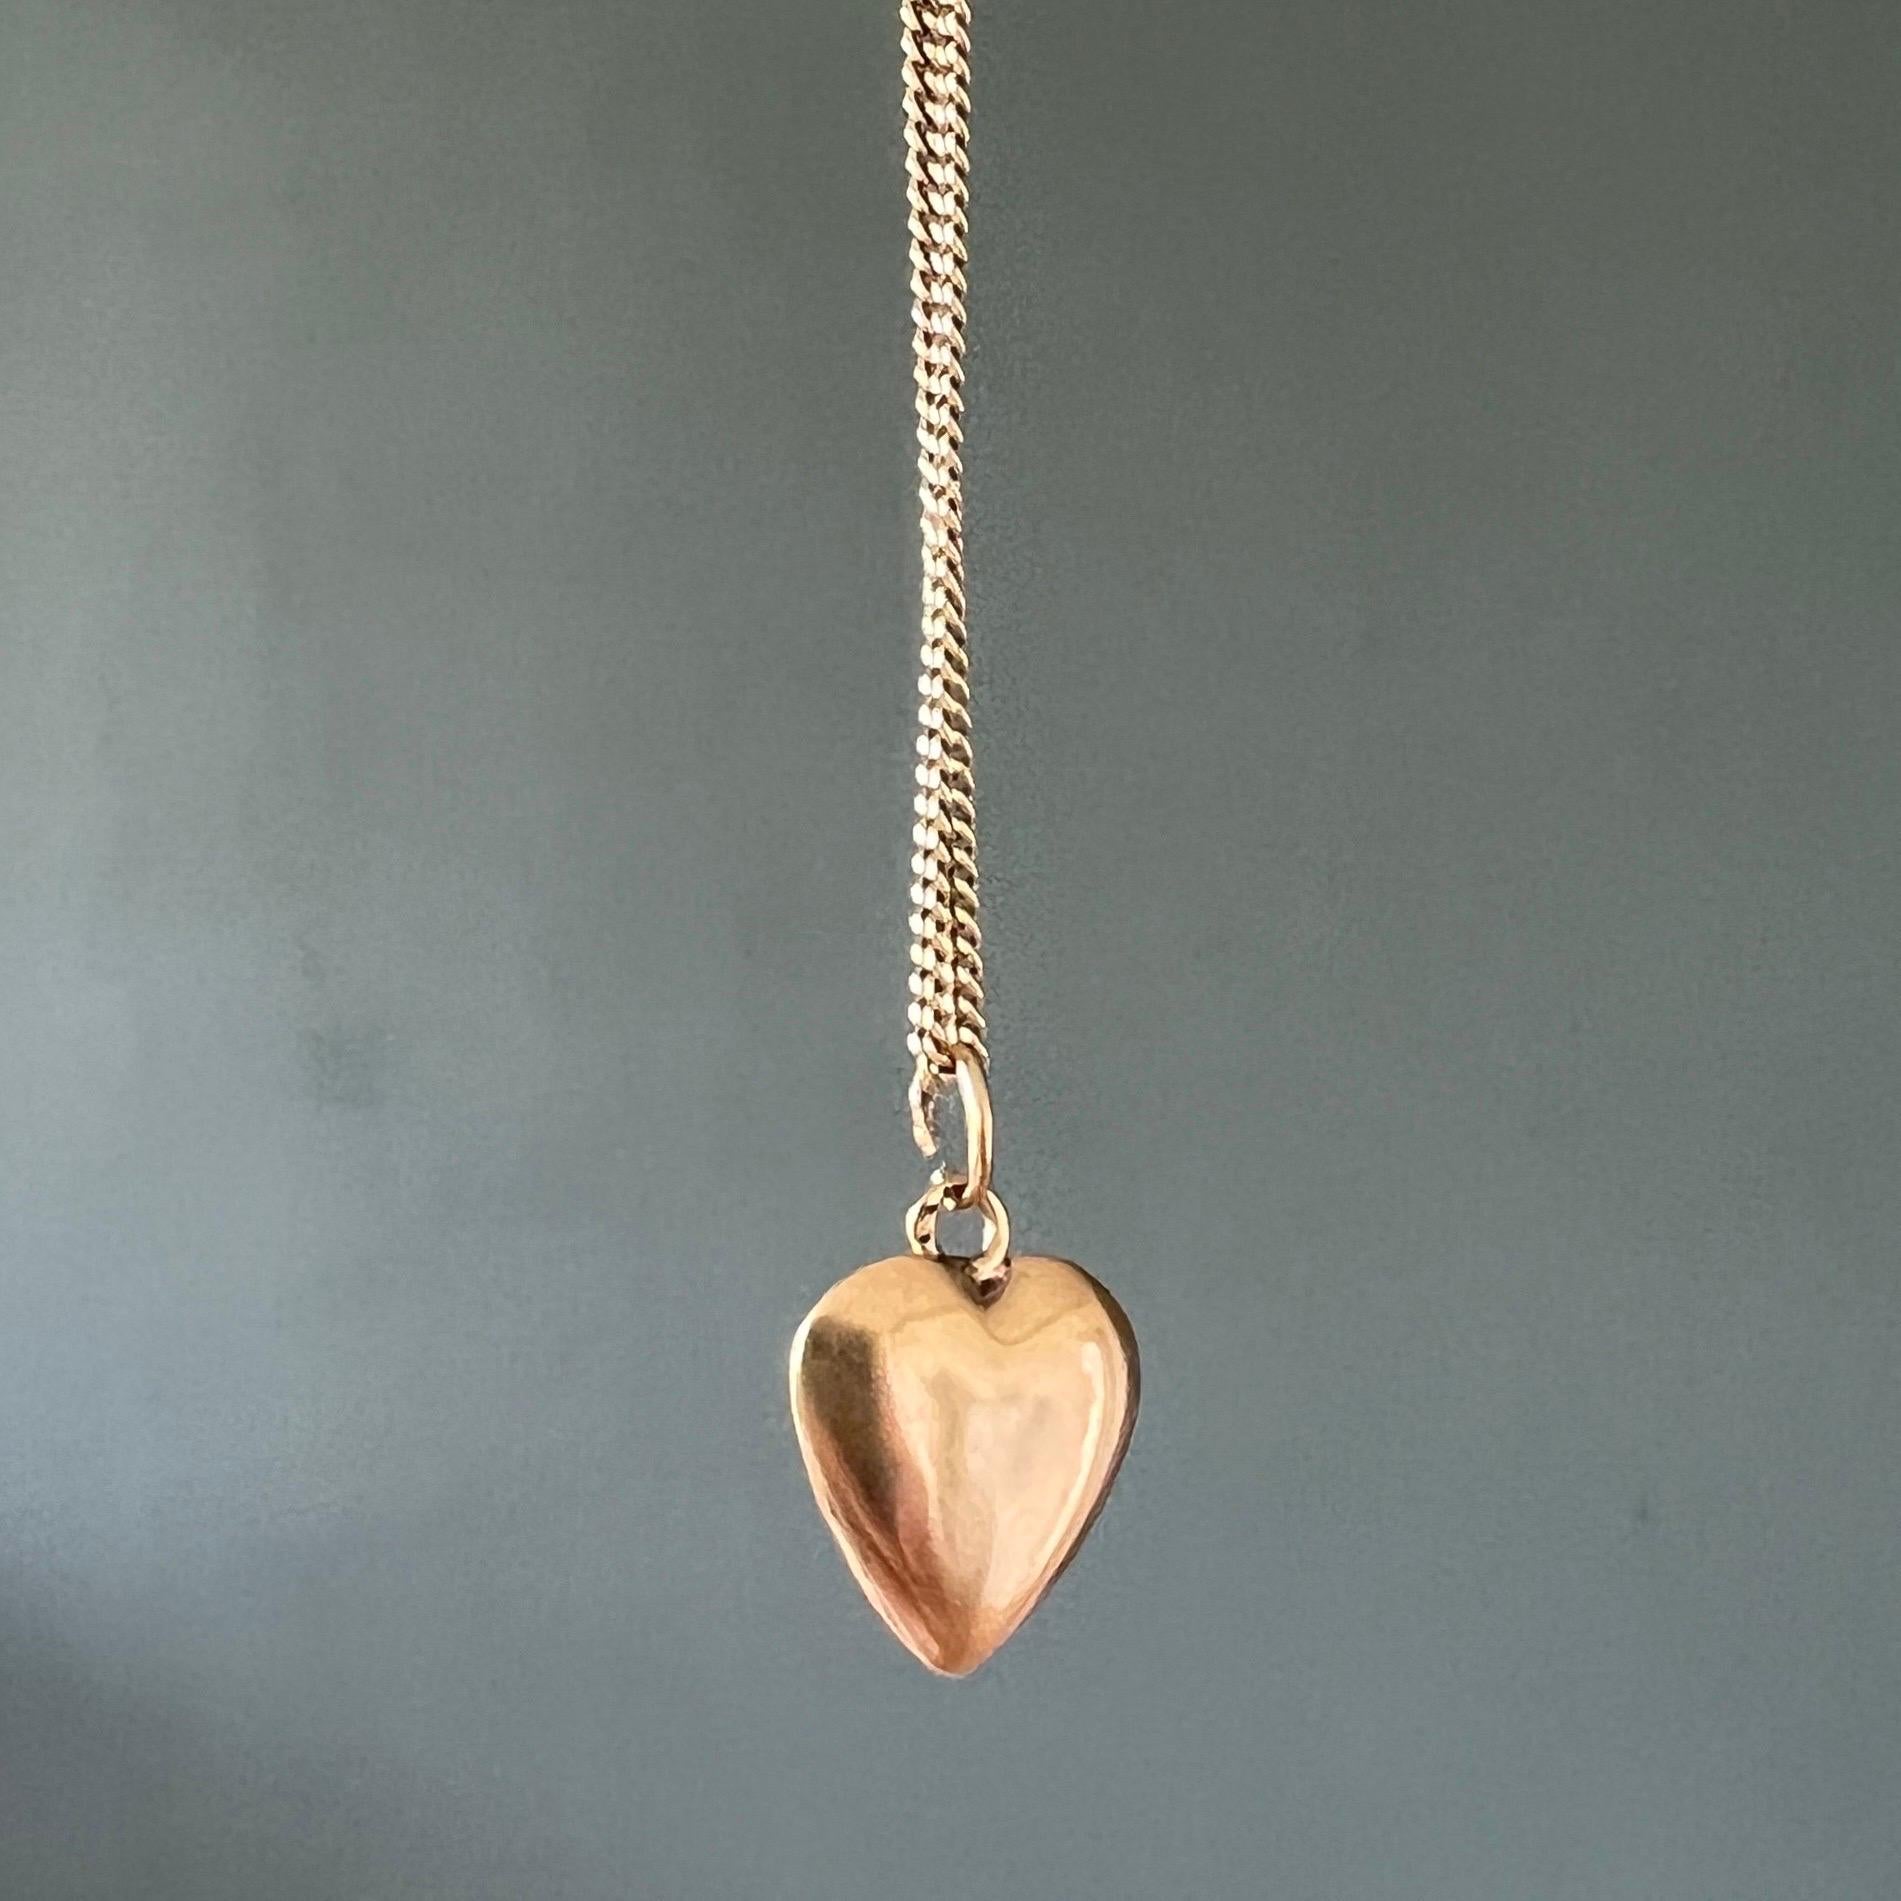 A 14 karat yellow gold vintage lovely heart charm pendant. The surface of this gold heart charm is smooth and polished on each side. 

Collect your own charms as wearable memories, it has a symbolic and often a sentimental value. This beautiful